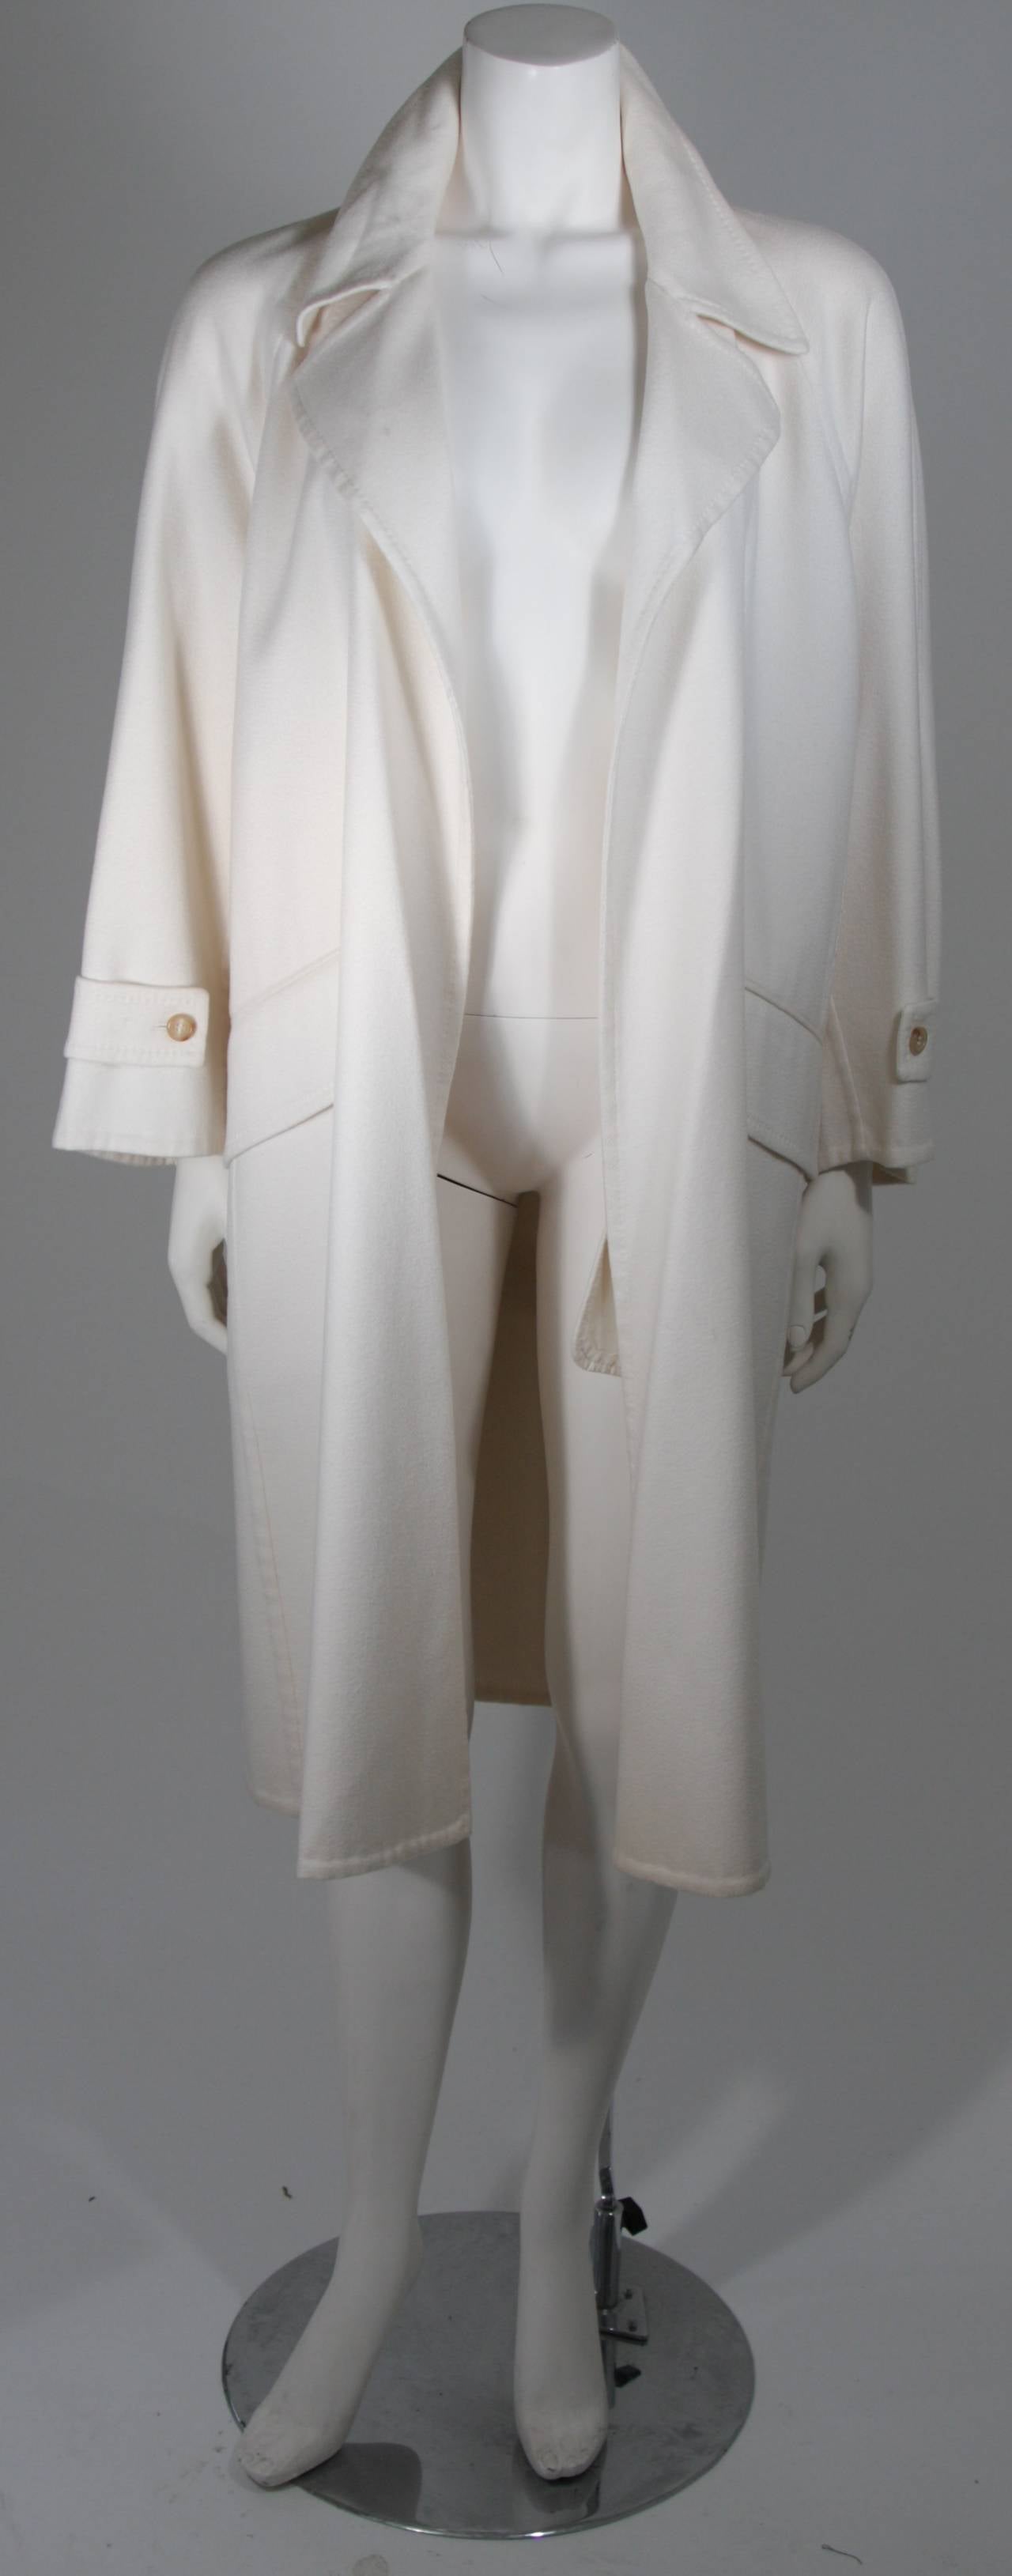 Gray Yves Saint Laurent Cream/White Cashmere Belted Trench Coat NWT For Sale